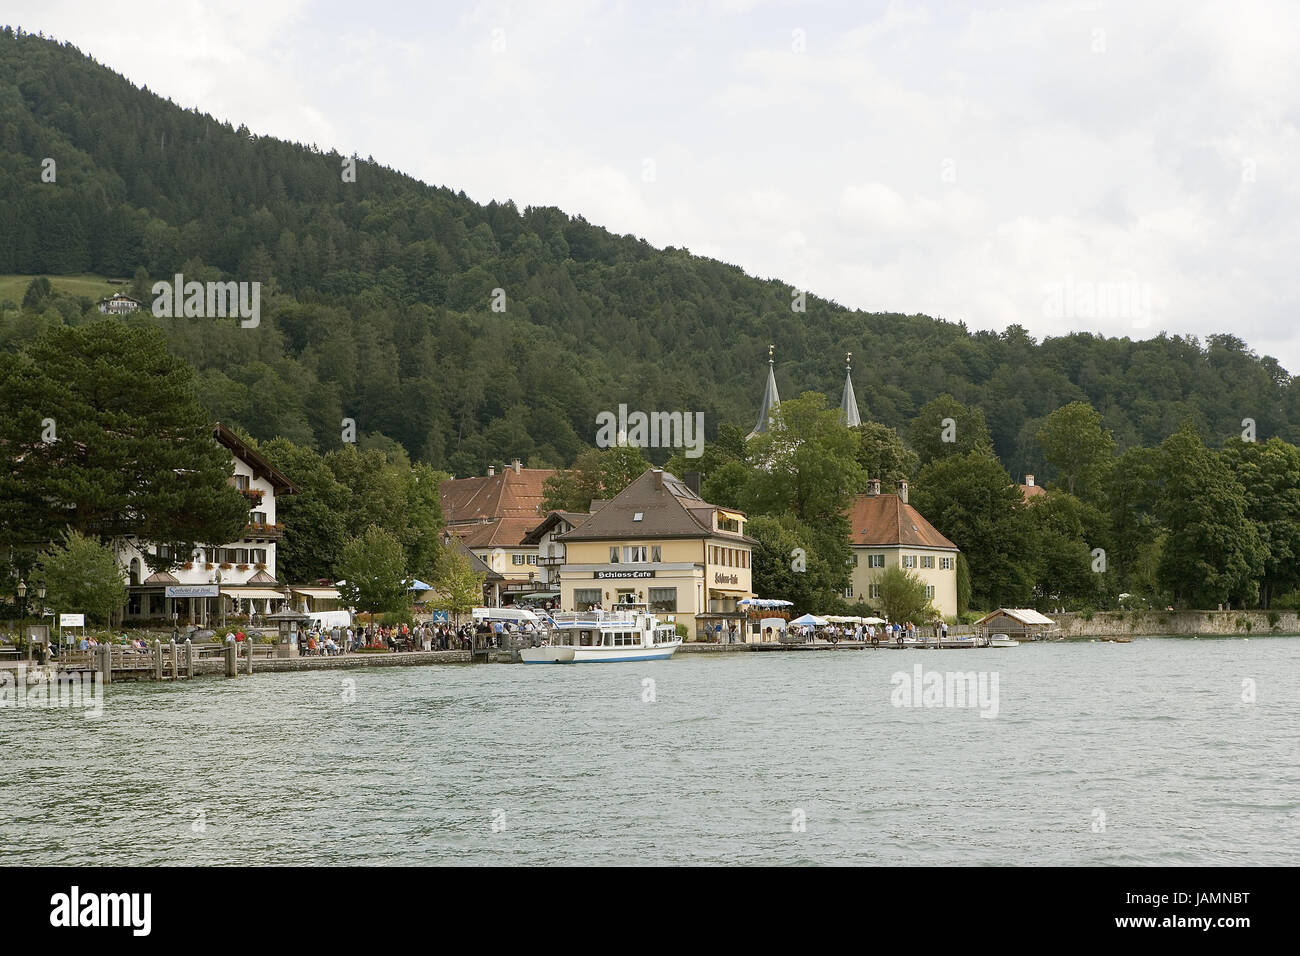 Germany,Upper Bavaria,Tegernsee,excursion boat,cafe,Bavaria,place,health resort,resort,lake,houses,residential houses,cloister,basilica,steeples,inn,lock cafe,gastronomy,destination,excursion,boat,tourism,tourist,person,trees,wood, Stock Photo